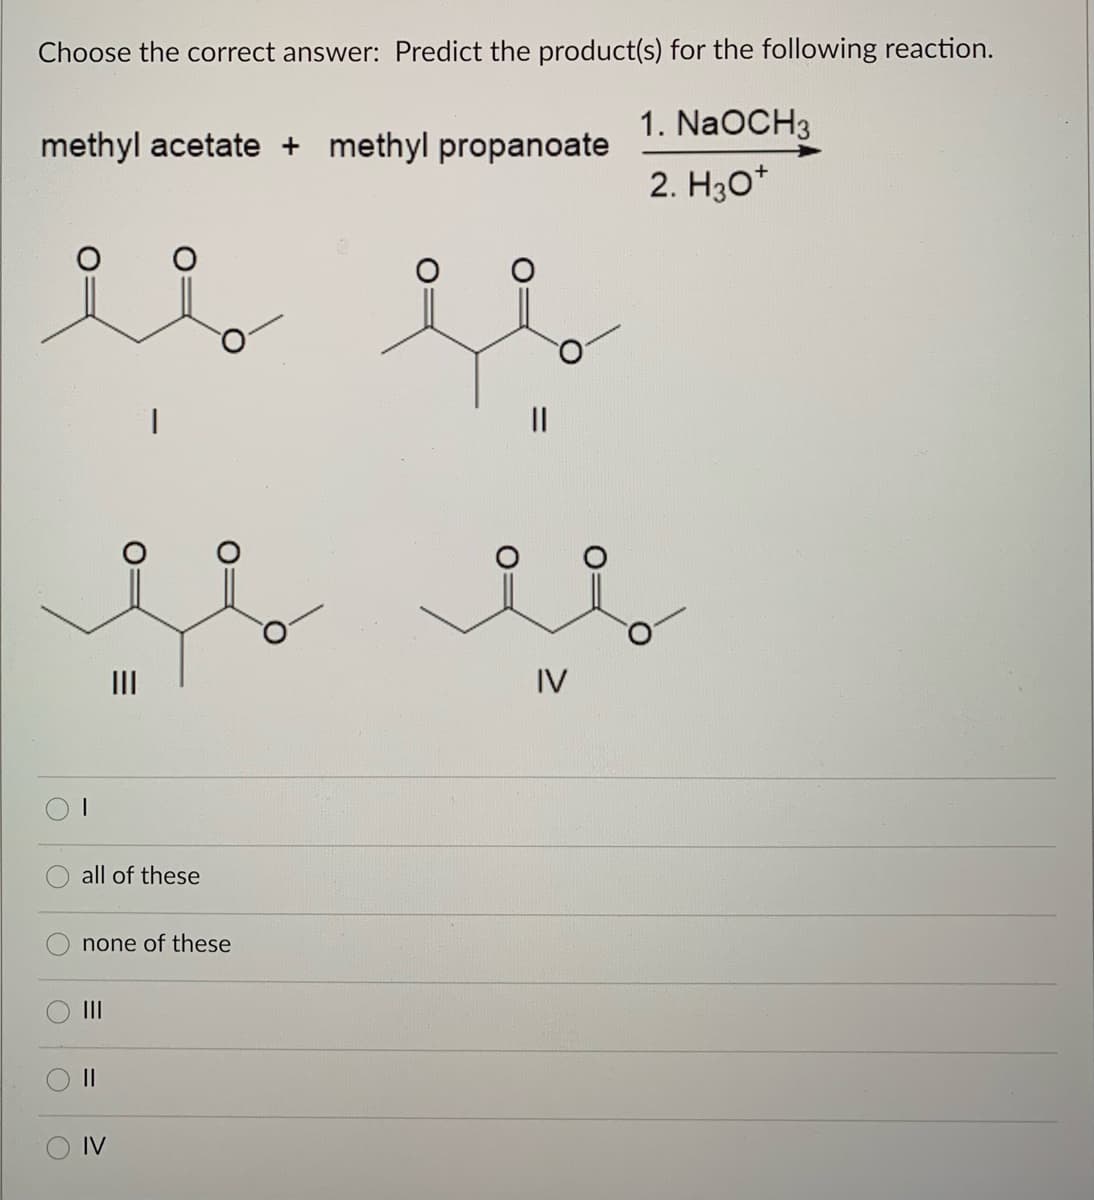 Choose the correct answer: Predict the product(s) for the following reaction.
1. NaOCH3
methyl acetate + methyl propanoate
2. H30*
II
IV
all of these
none of these
II
IV
